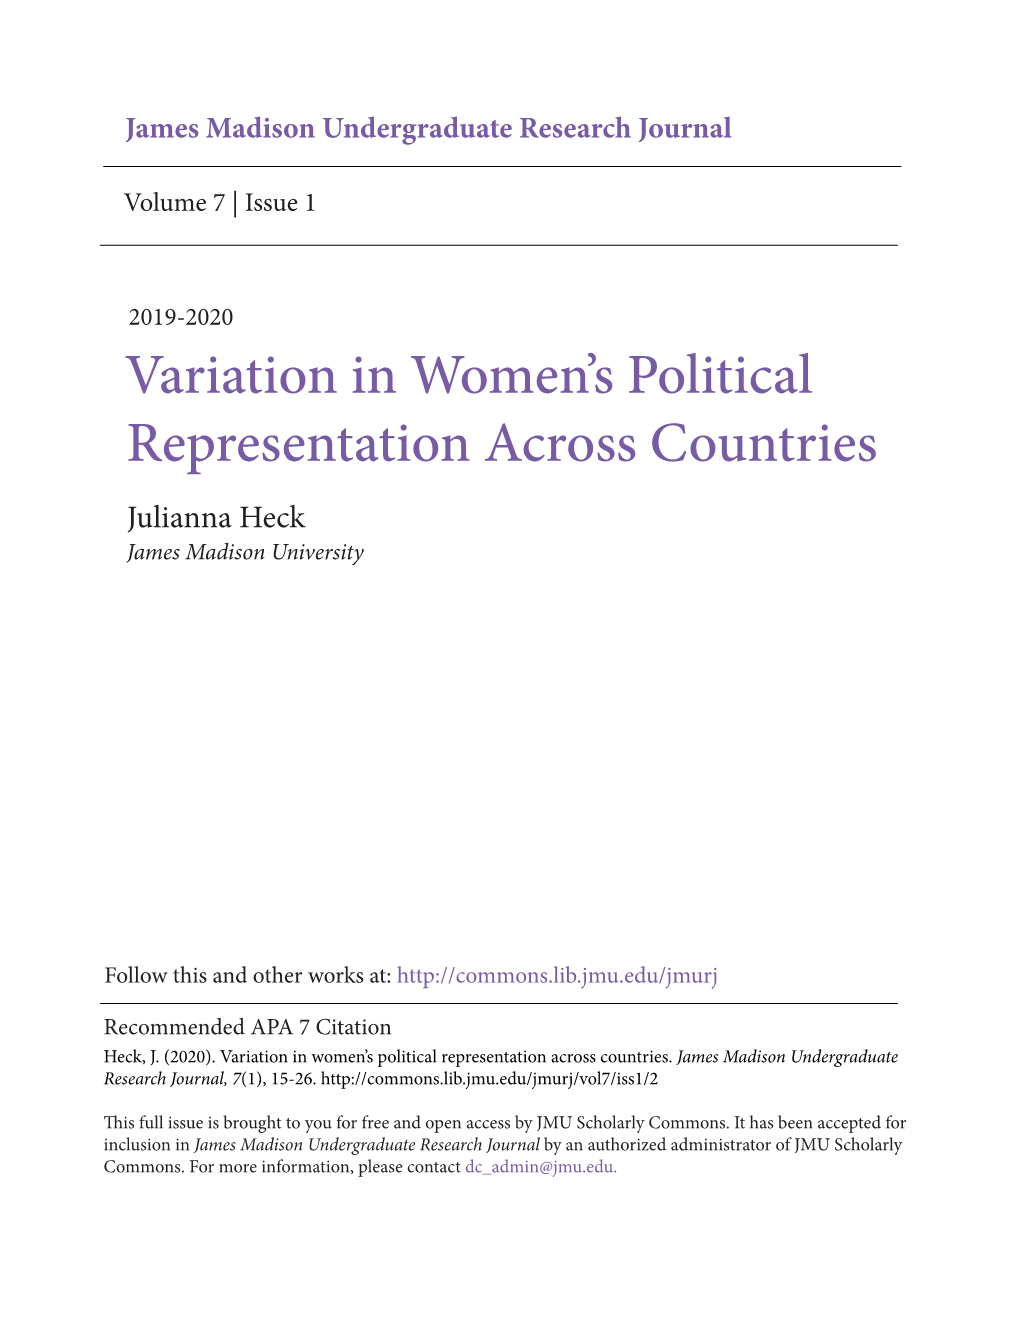 Variation in Women's Political Representation Across Countries